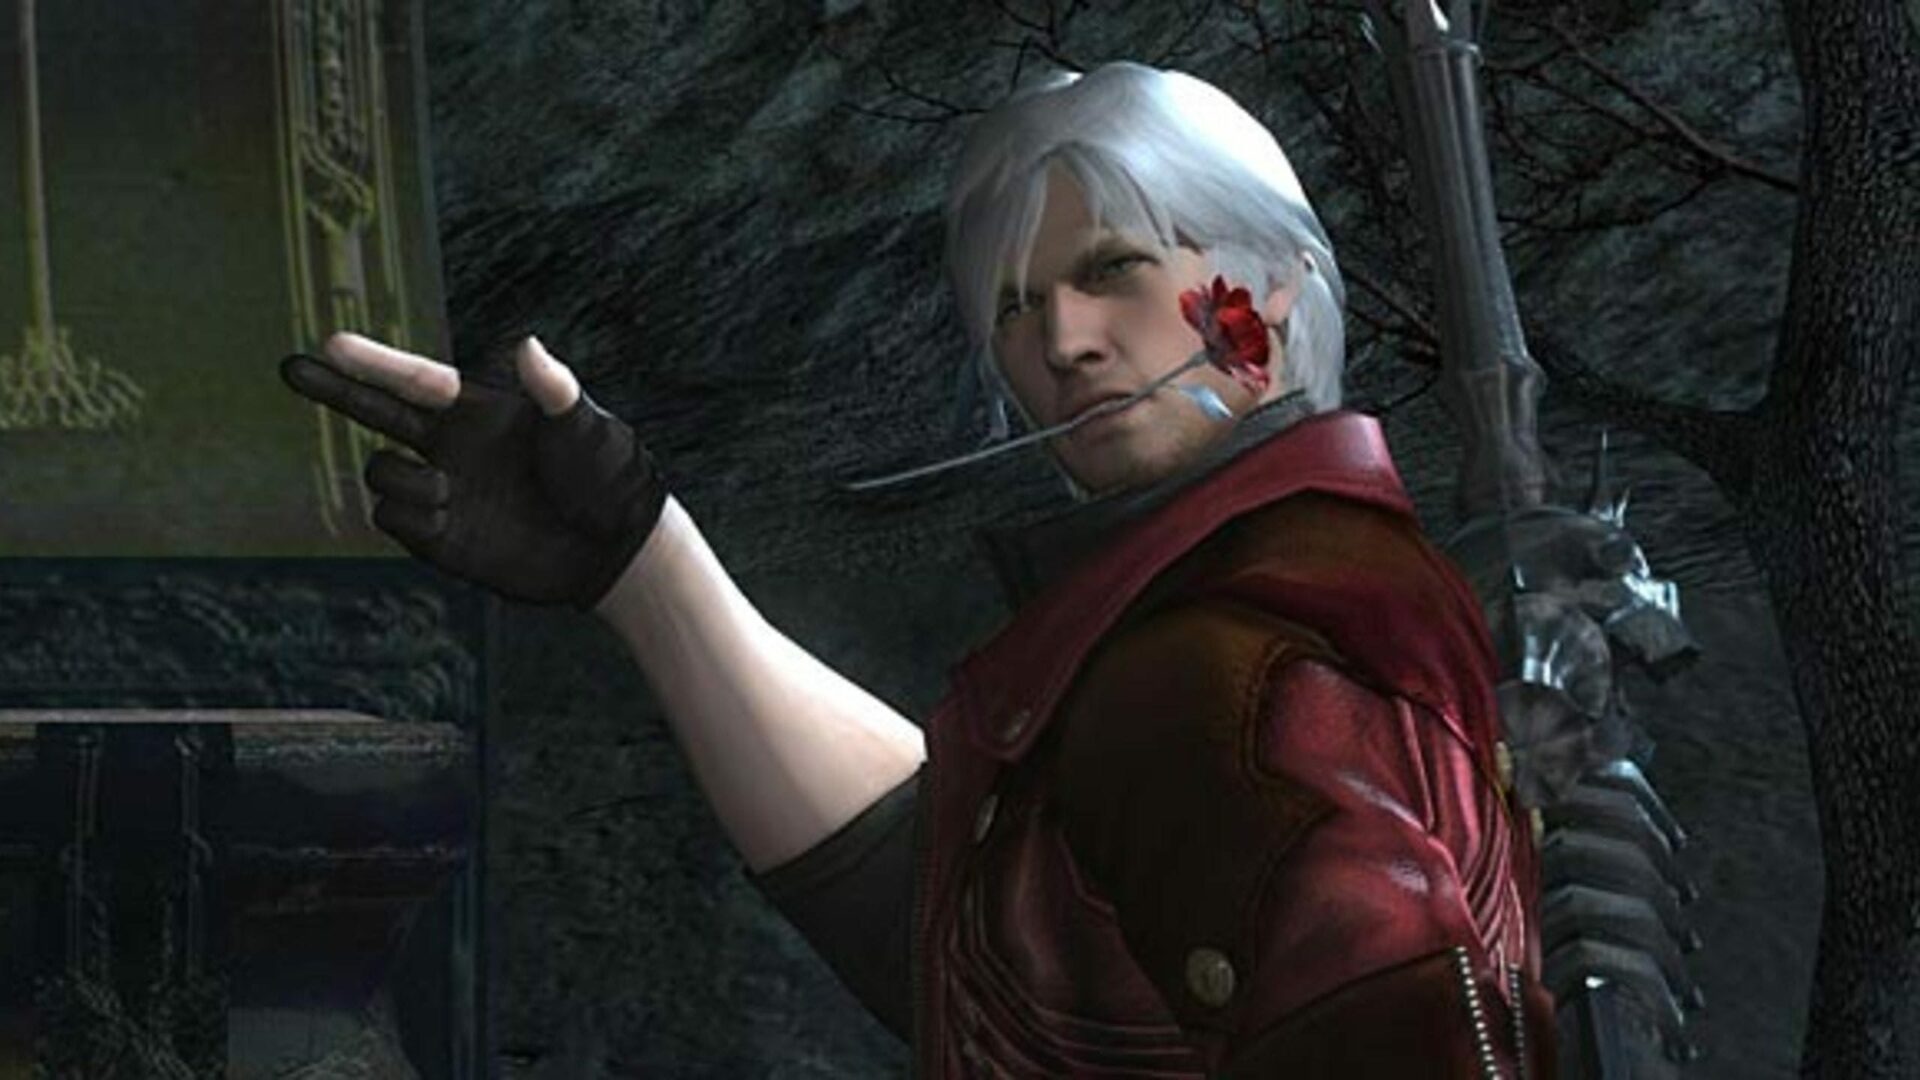 Cheapest Devil May Cry 4 Special Edition PC (STEAM) WW